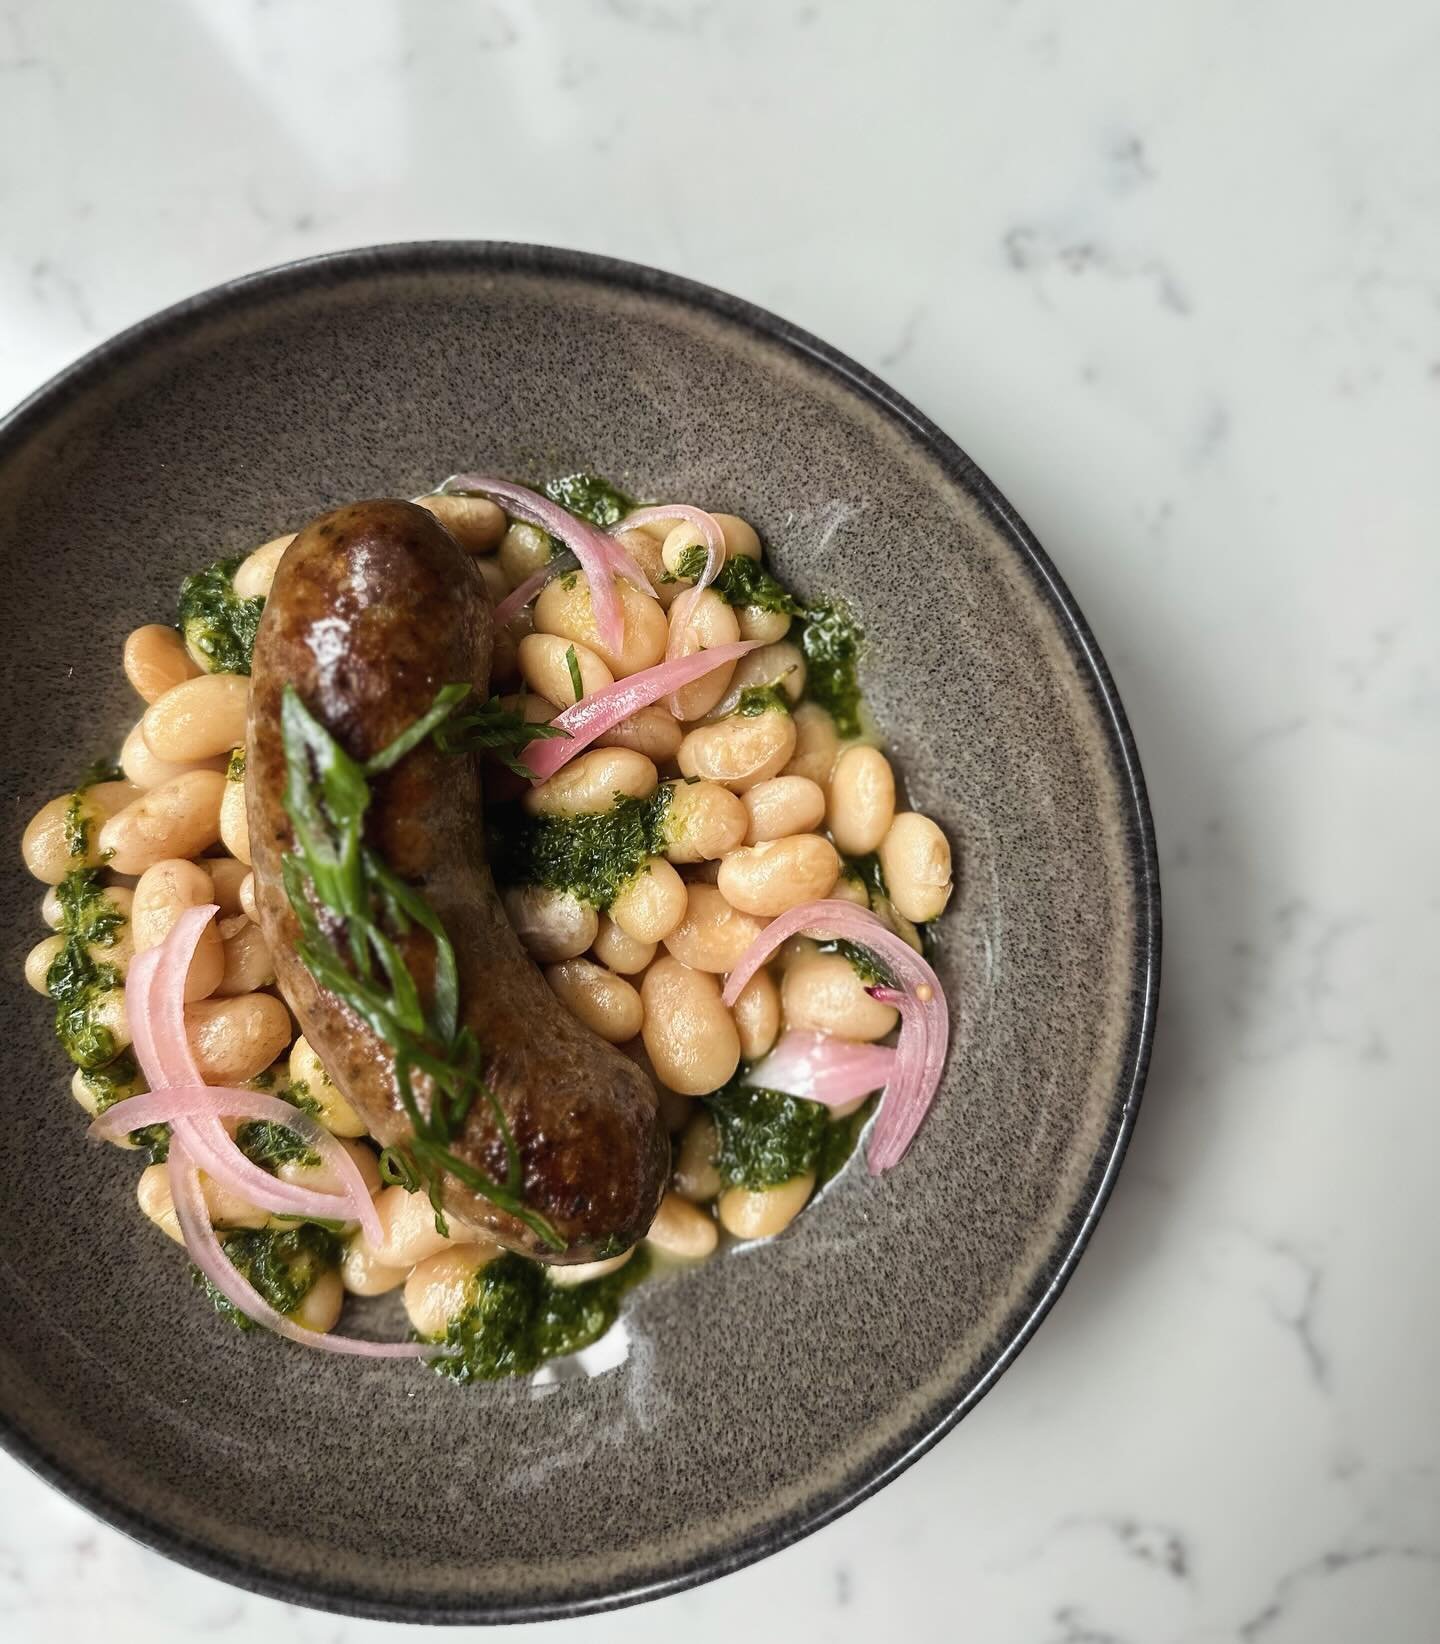 Housemade pork sausage with white beans, pickled red onions &amp; chimichurri sauce - not your typical #franksandbeans 😉

#pork #itdoesabodygood #fenwayfinds #sausagegoalz #nath&aacute;liewinebar #bostonfoodies #winebarvibz #thisishowwedoit #ticktic